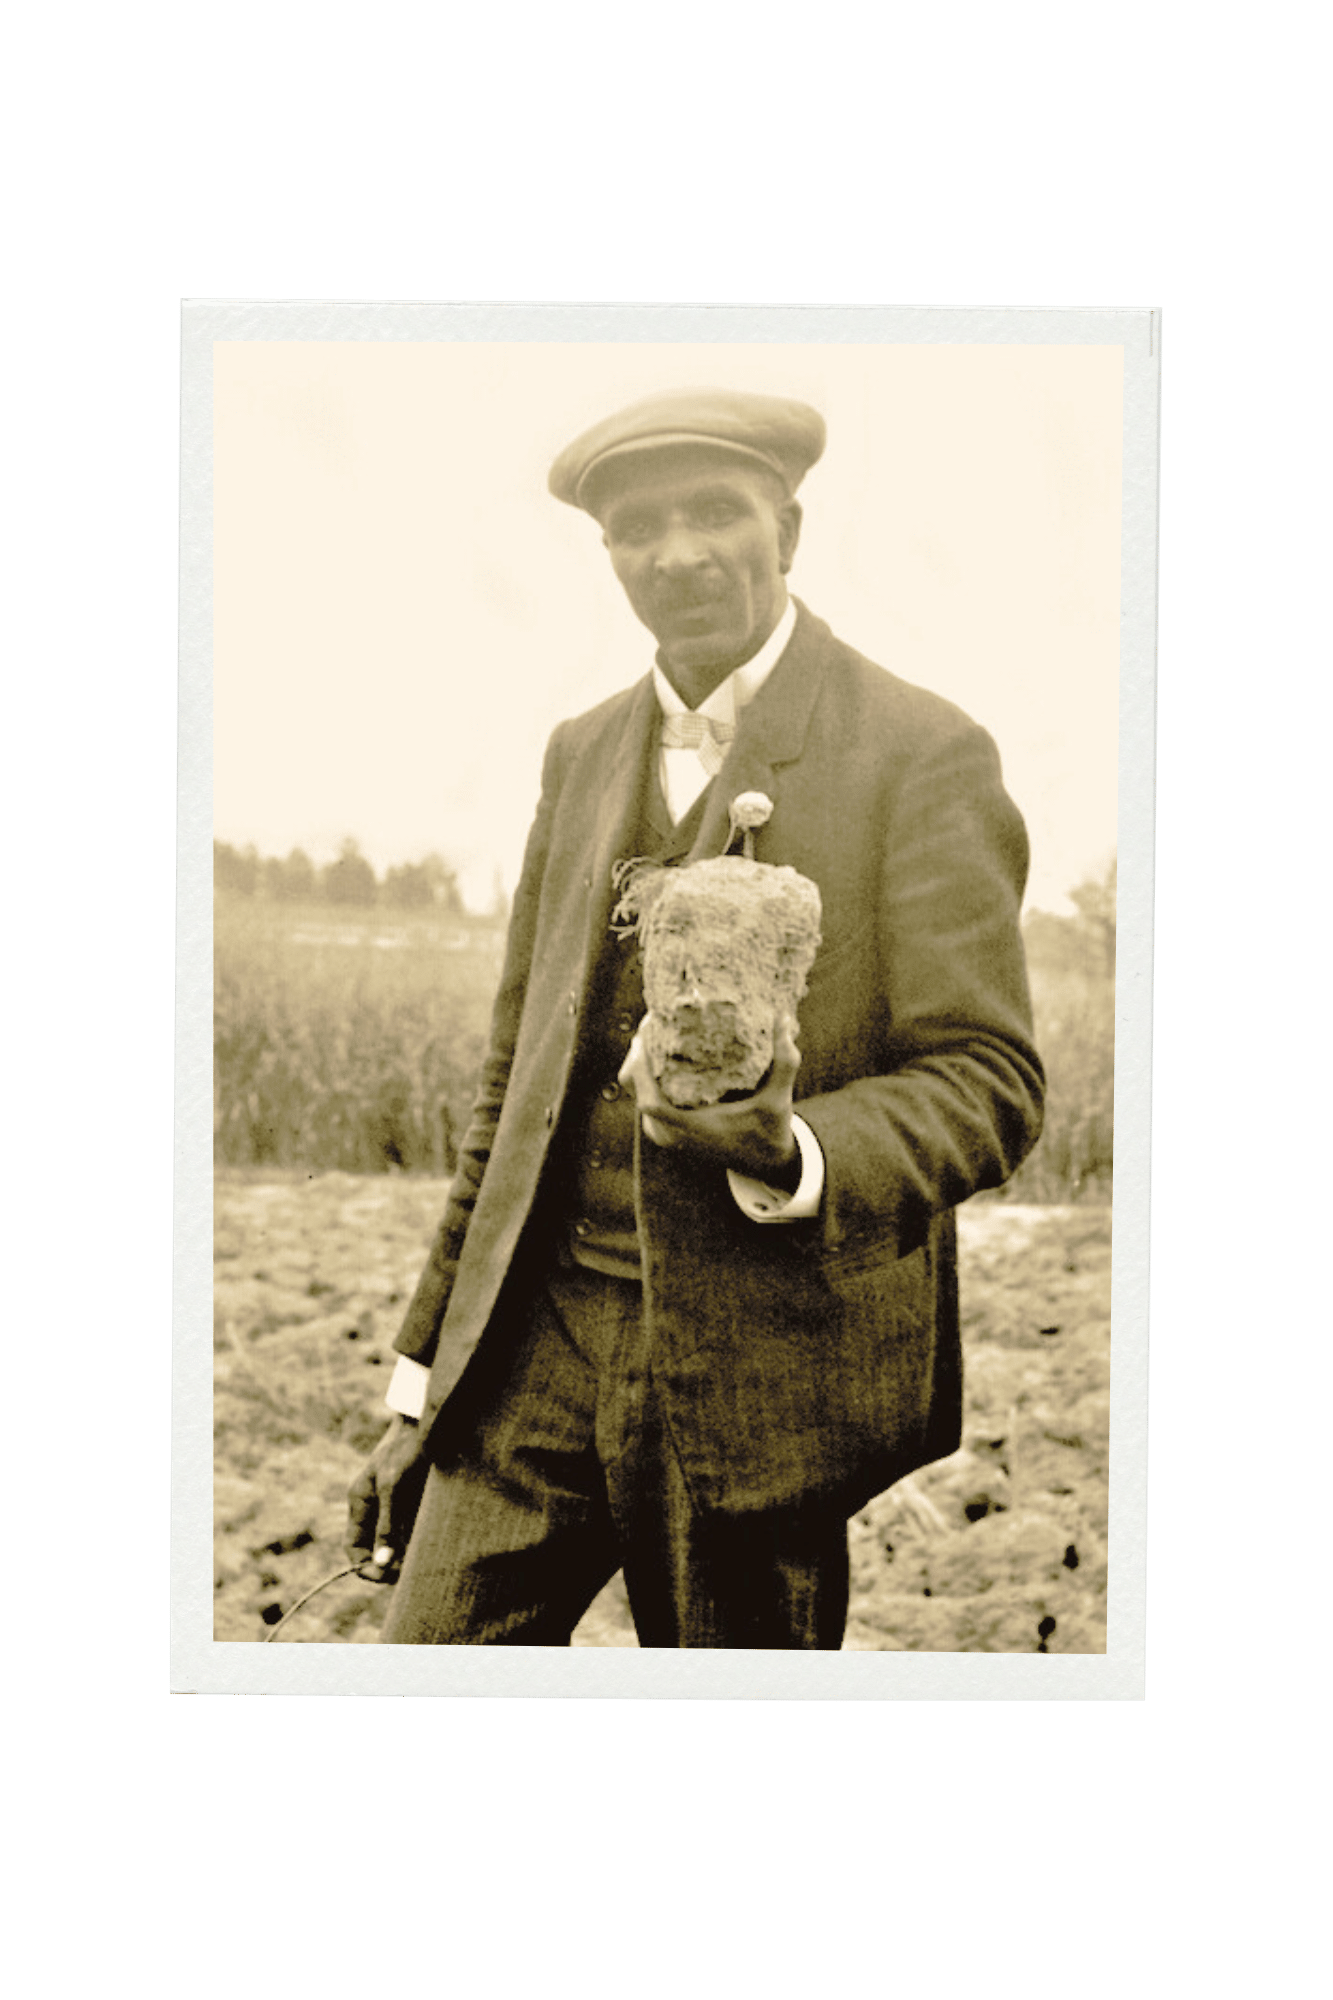 a vintage photo of George Washington Carver holding a sign posing for the camera